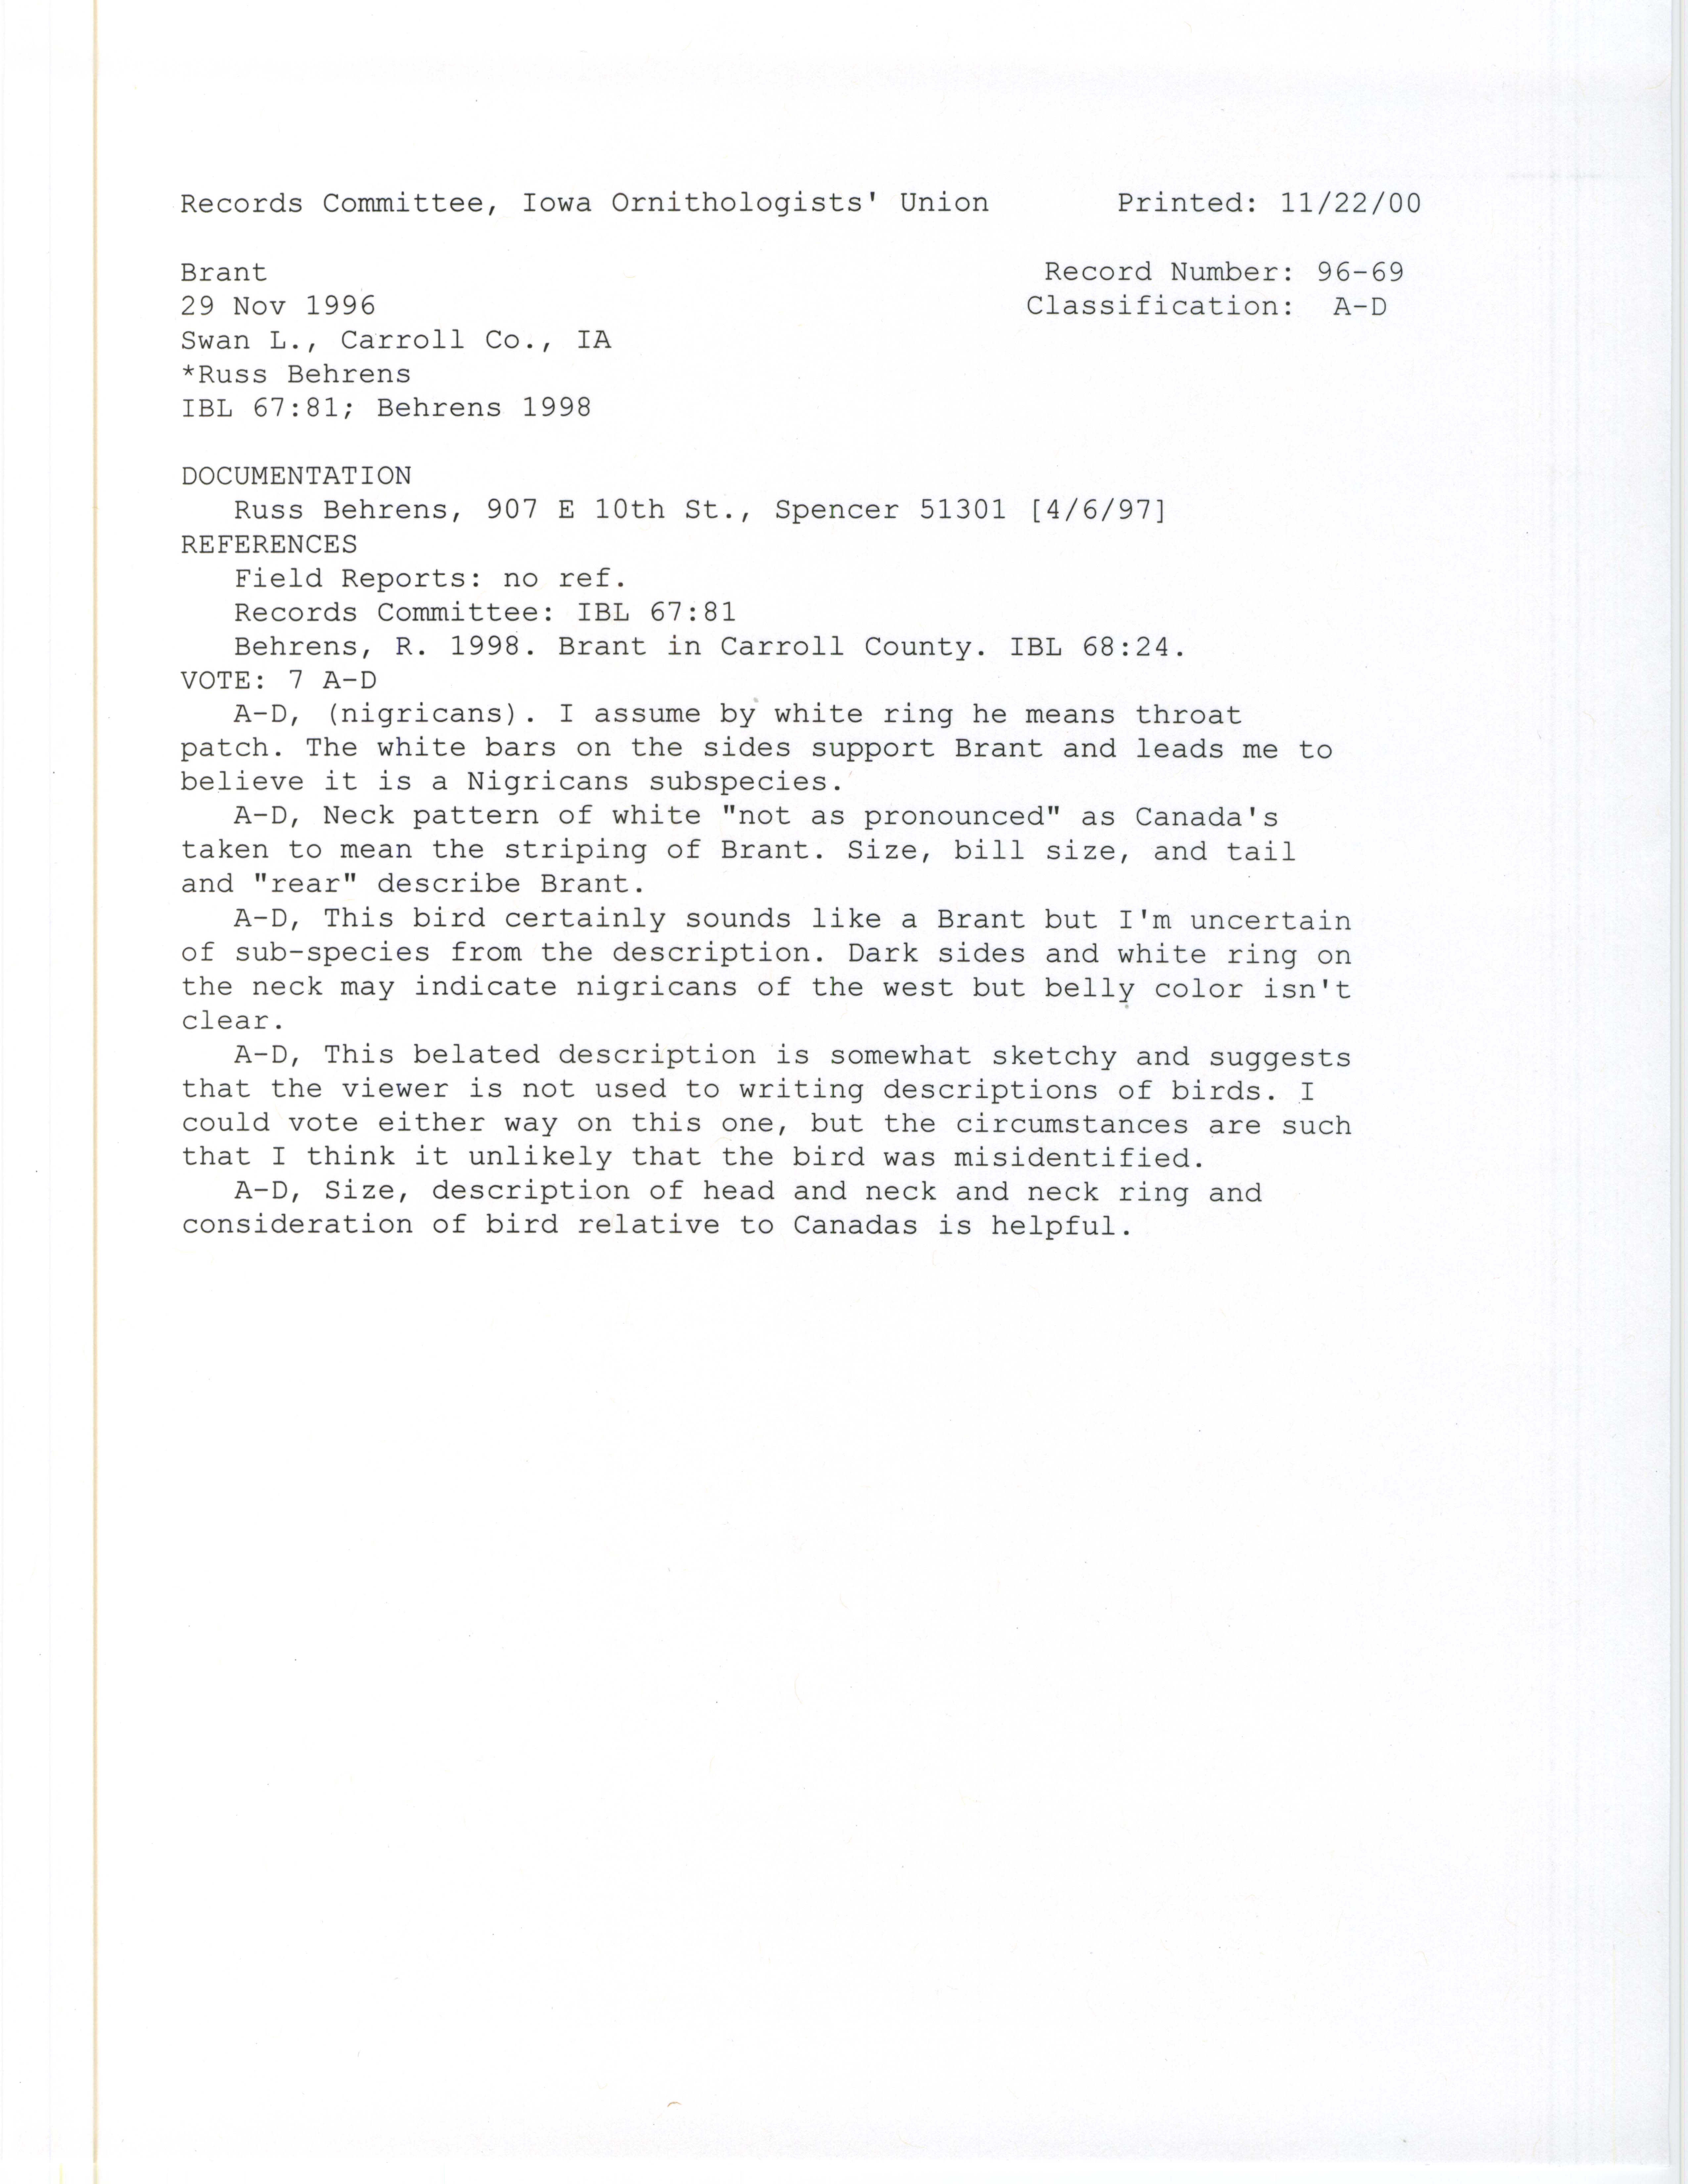 Records Committee review for rare bird sighting for Brant at Swan Lake in 1996